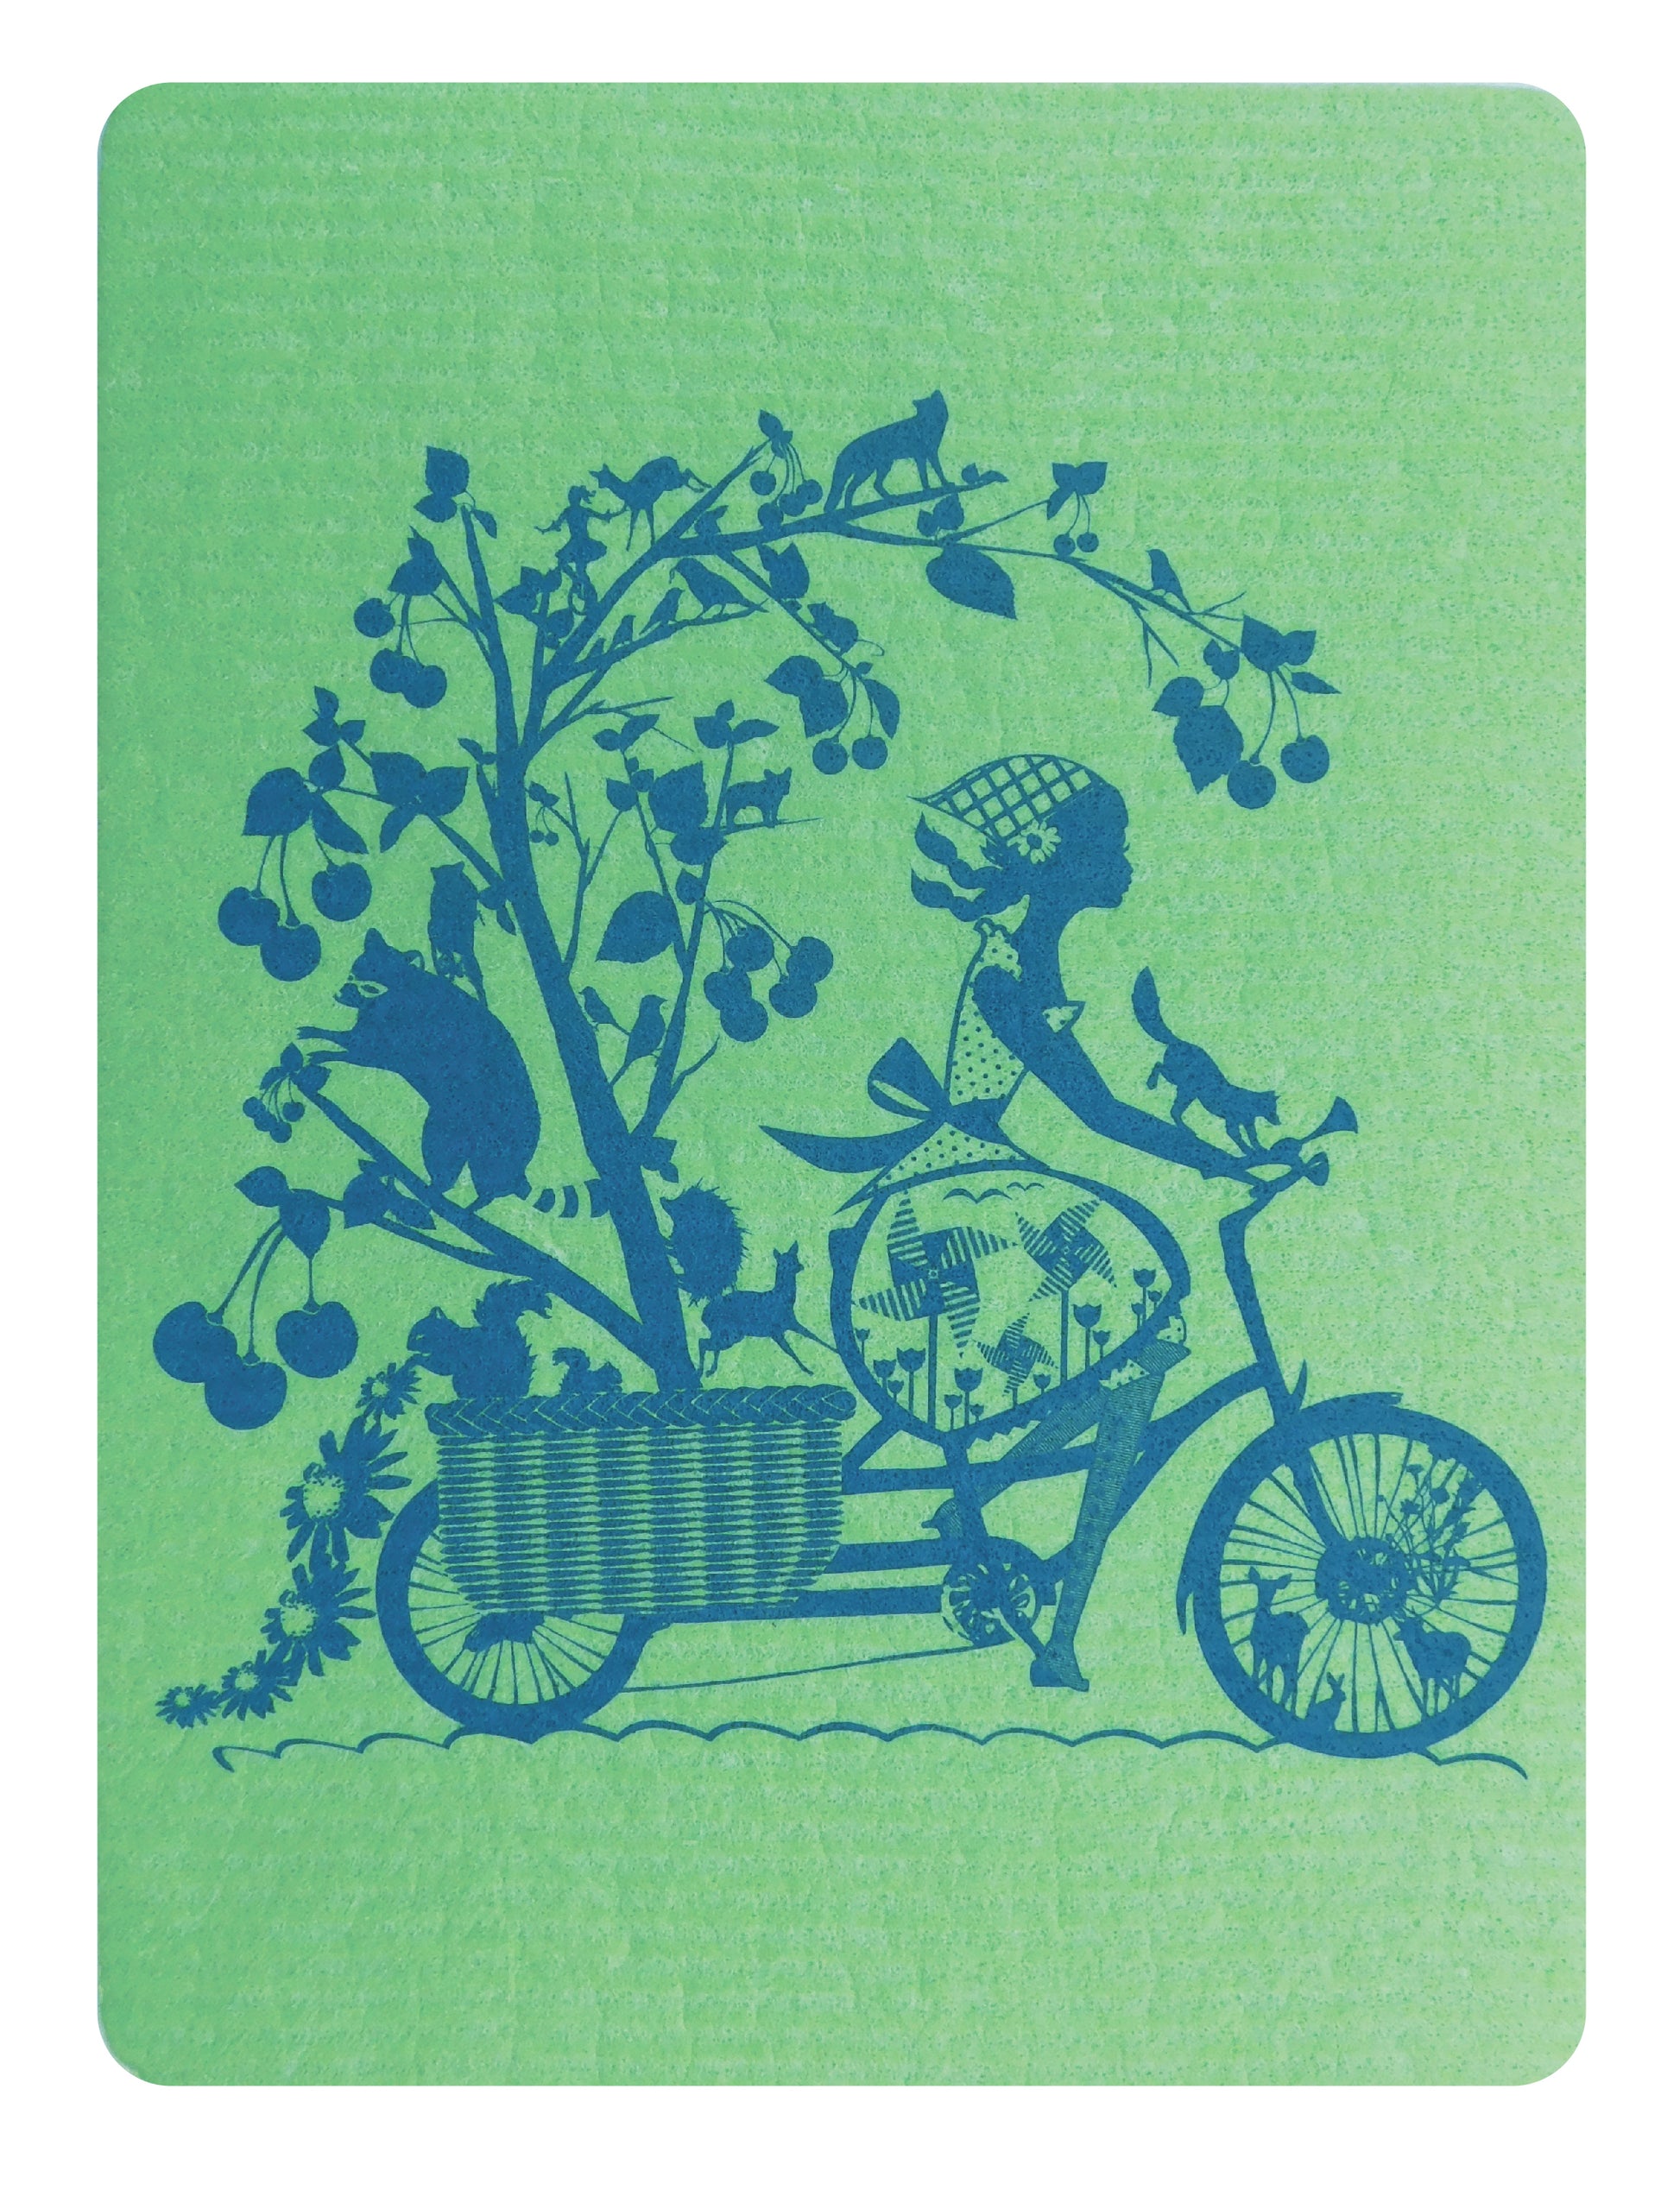 Green Swedish dishcloth printed with a girl on a bicycle